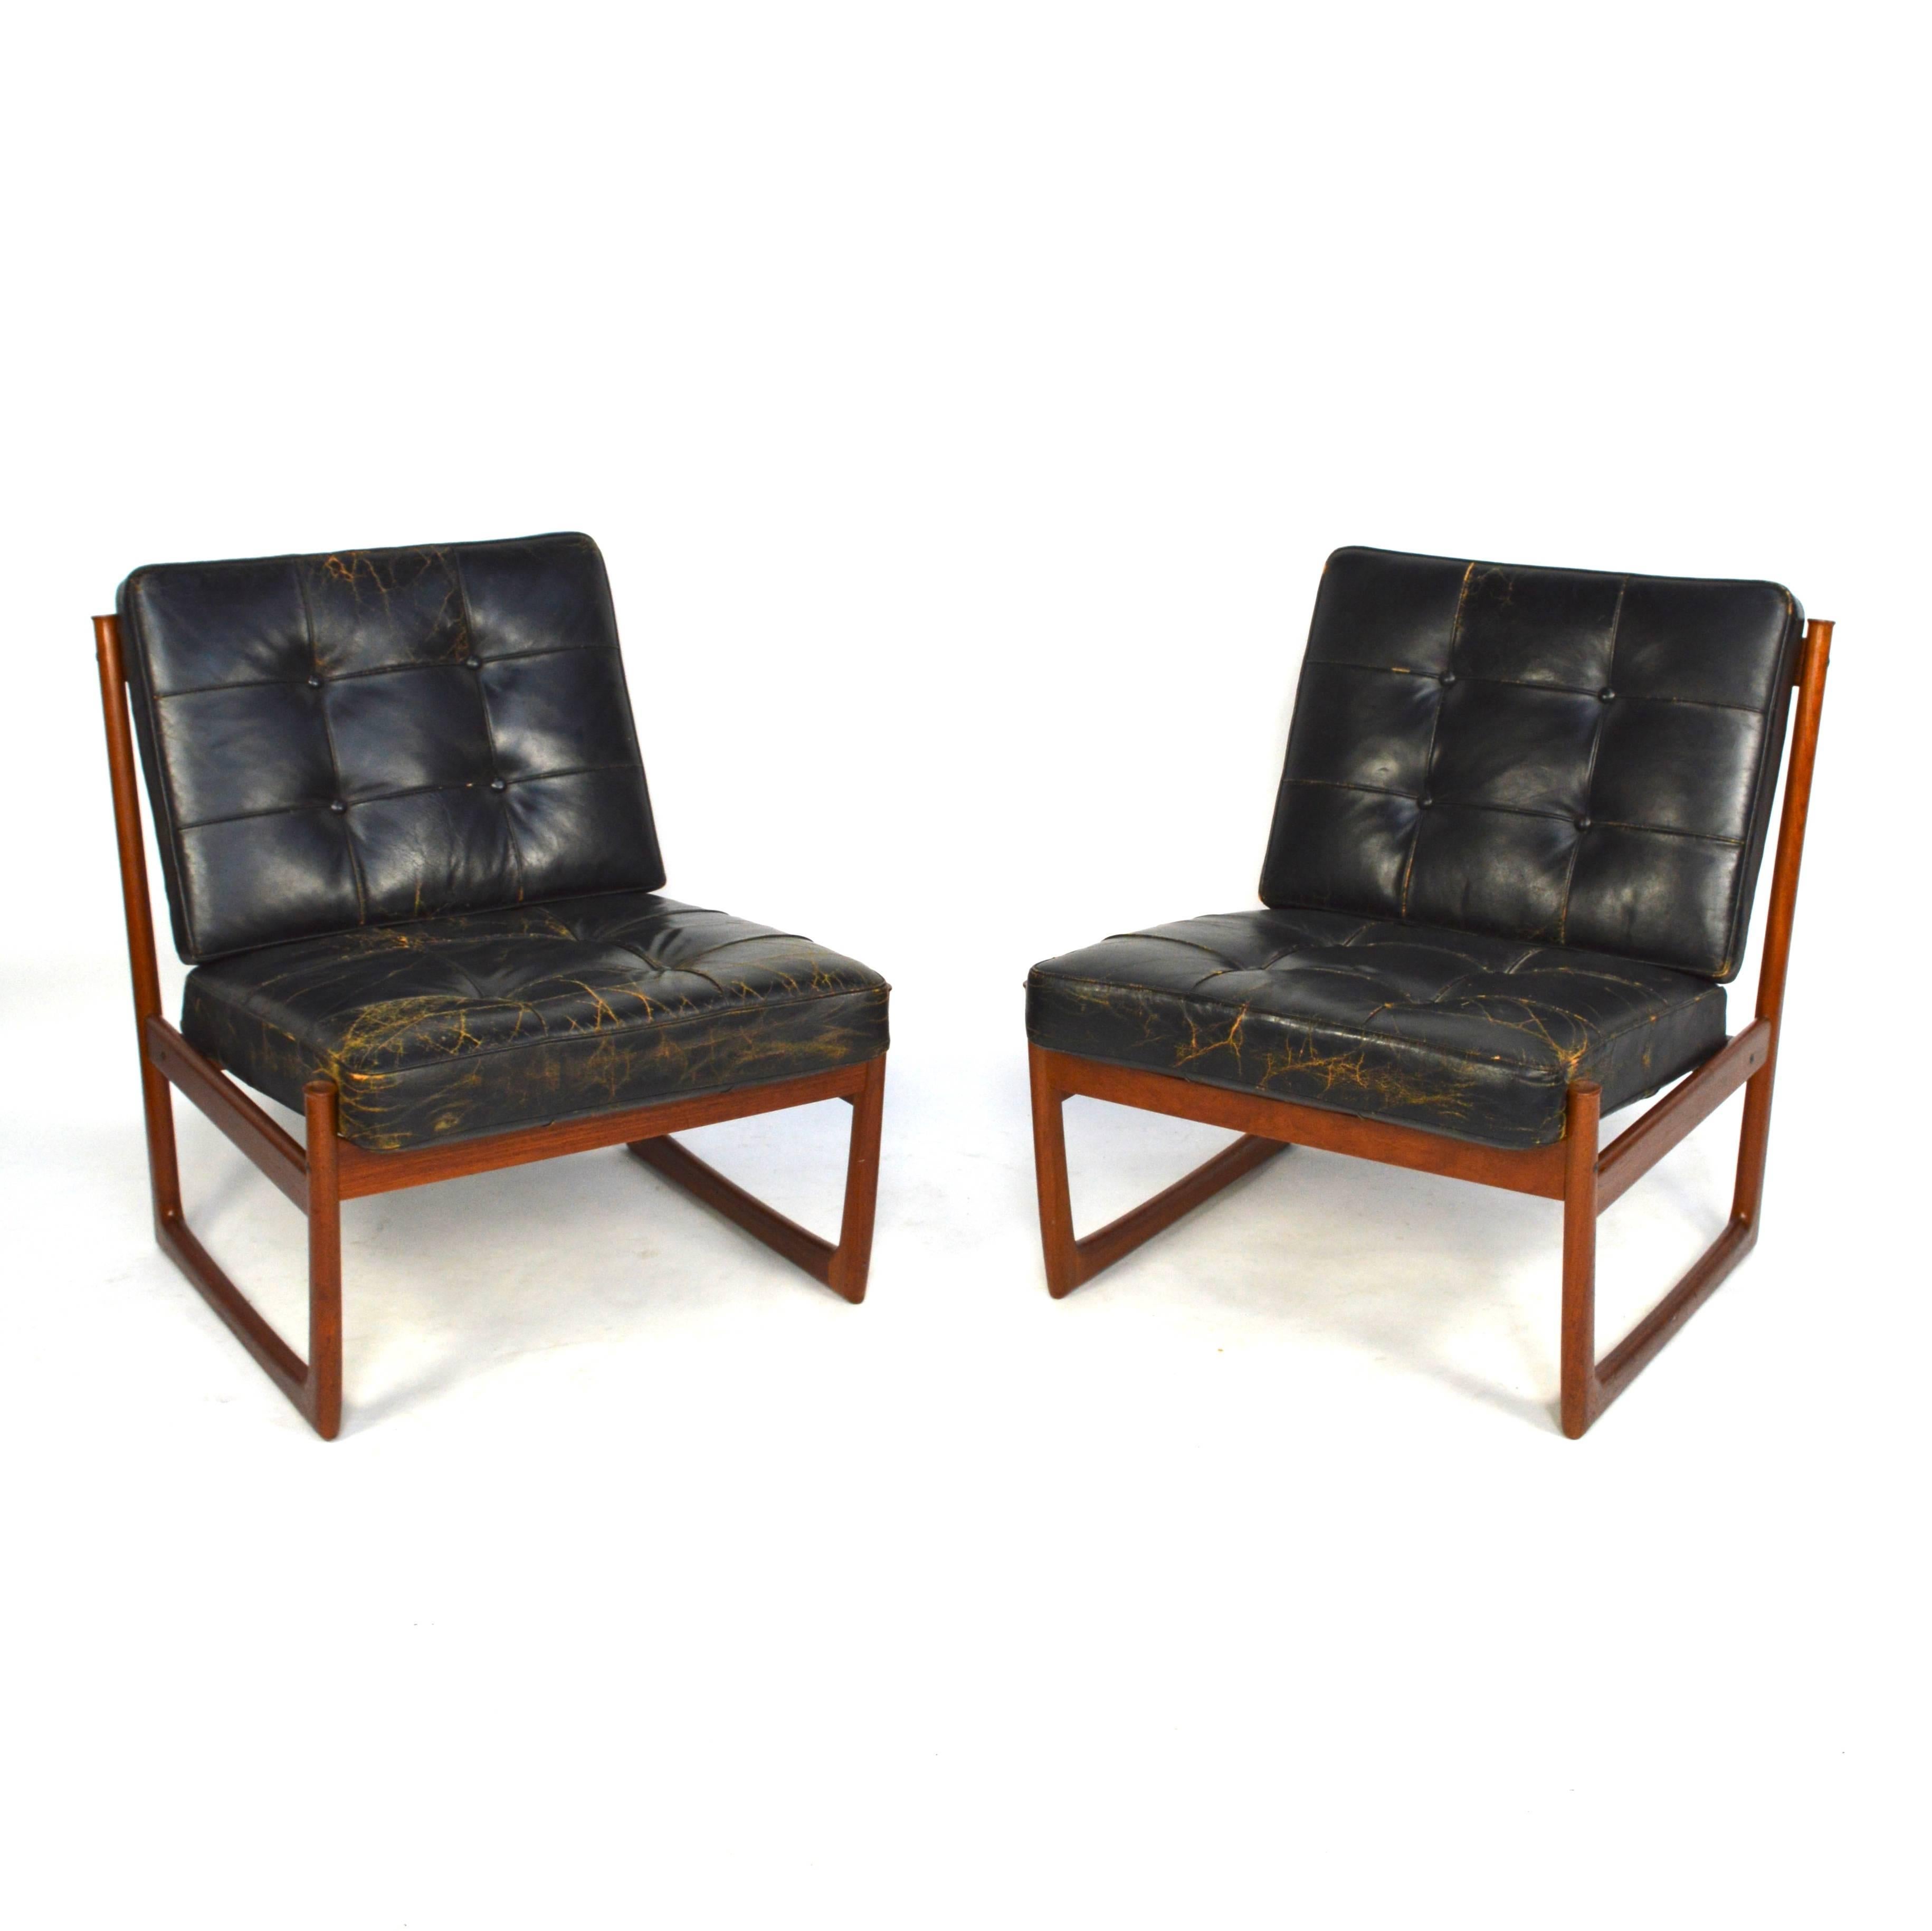 Mid-20th Century Pair of Danish Teak Lounge Chairs Model FD130 by Peter Hvidt and Orla Mølgaard